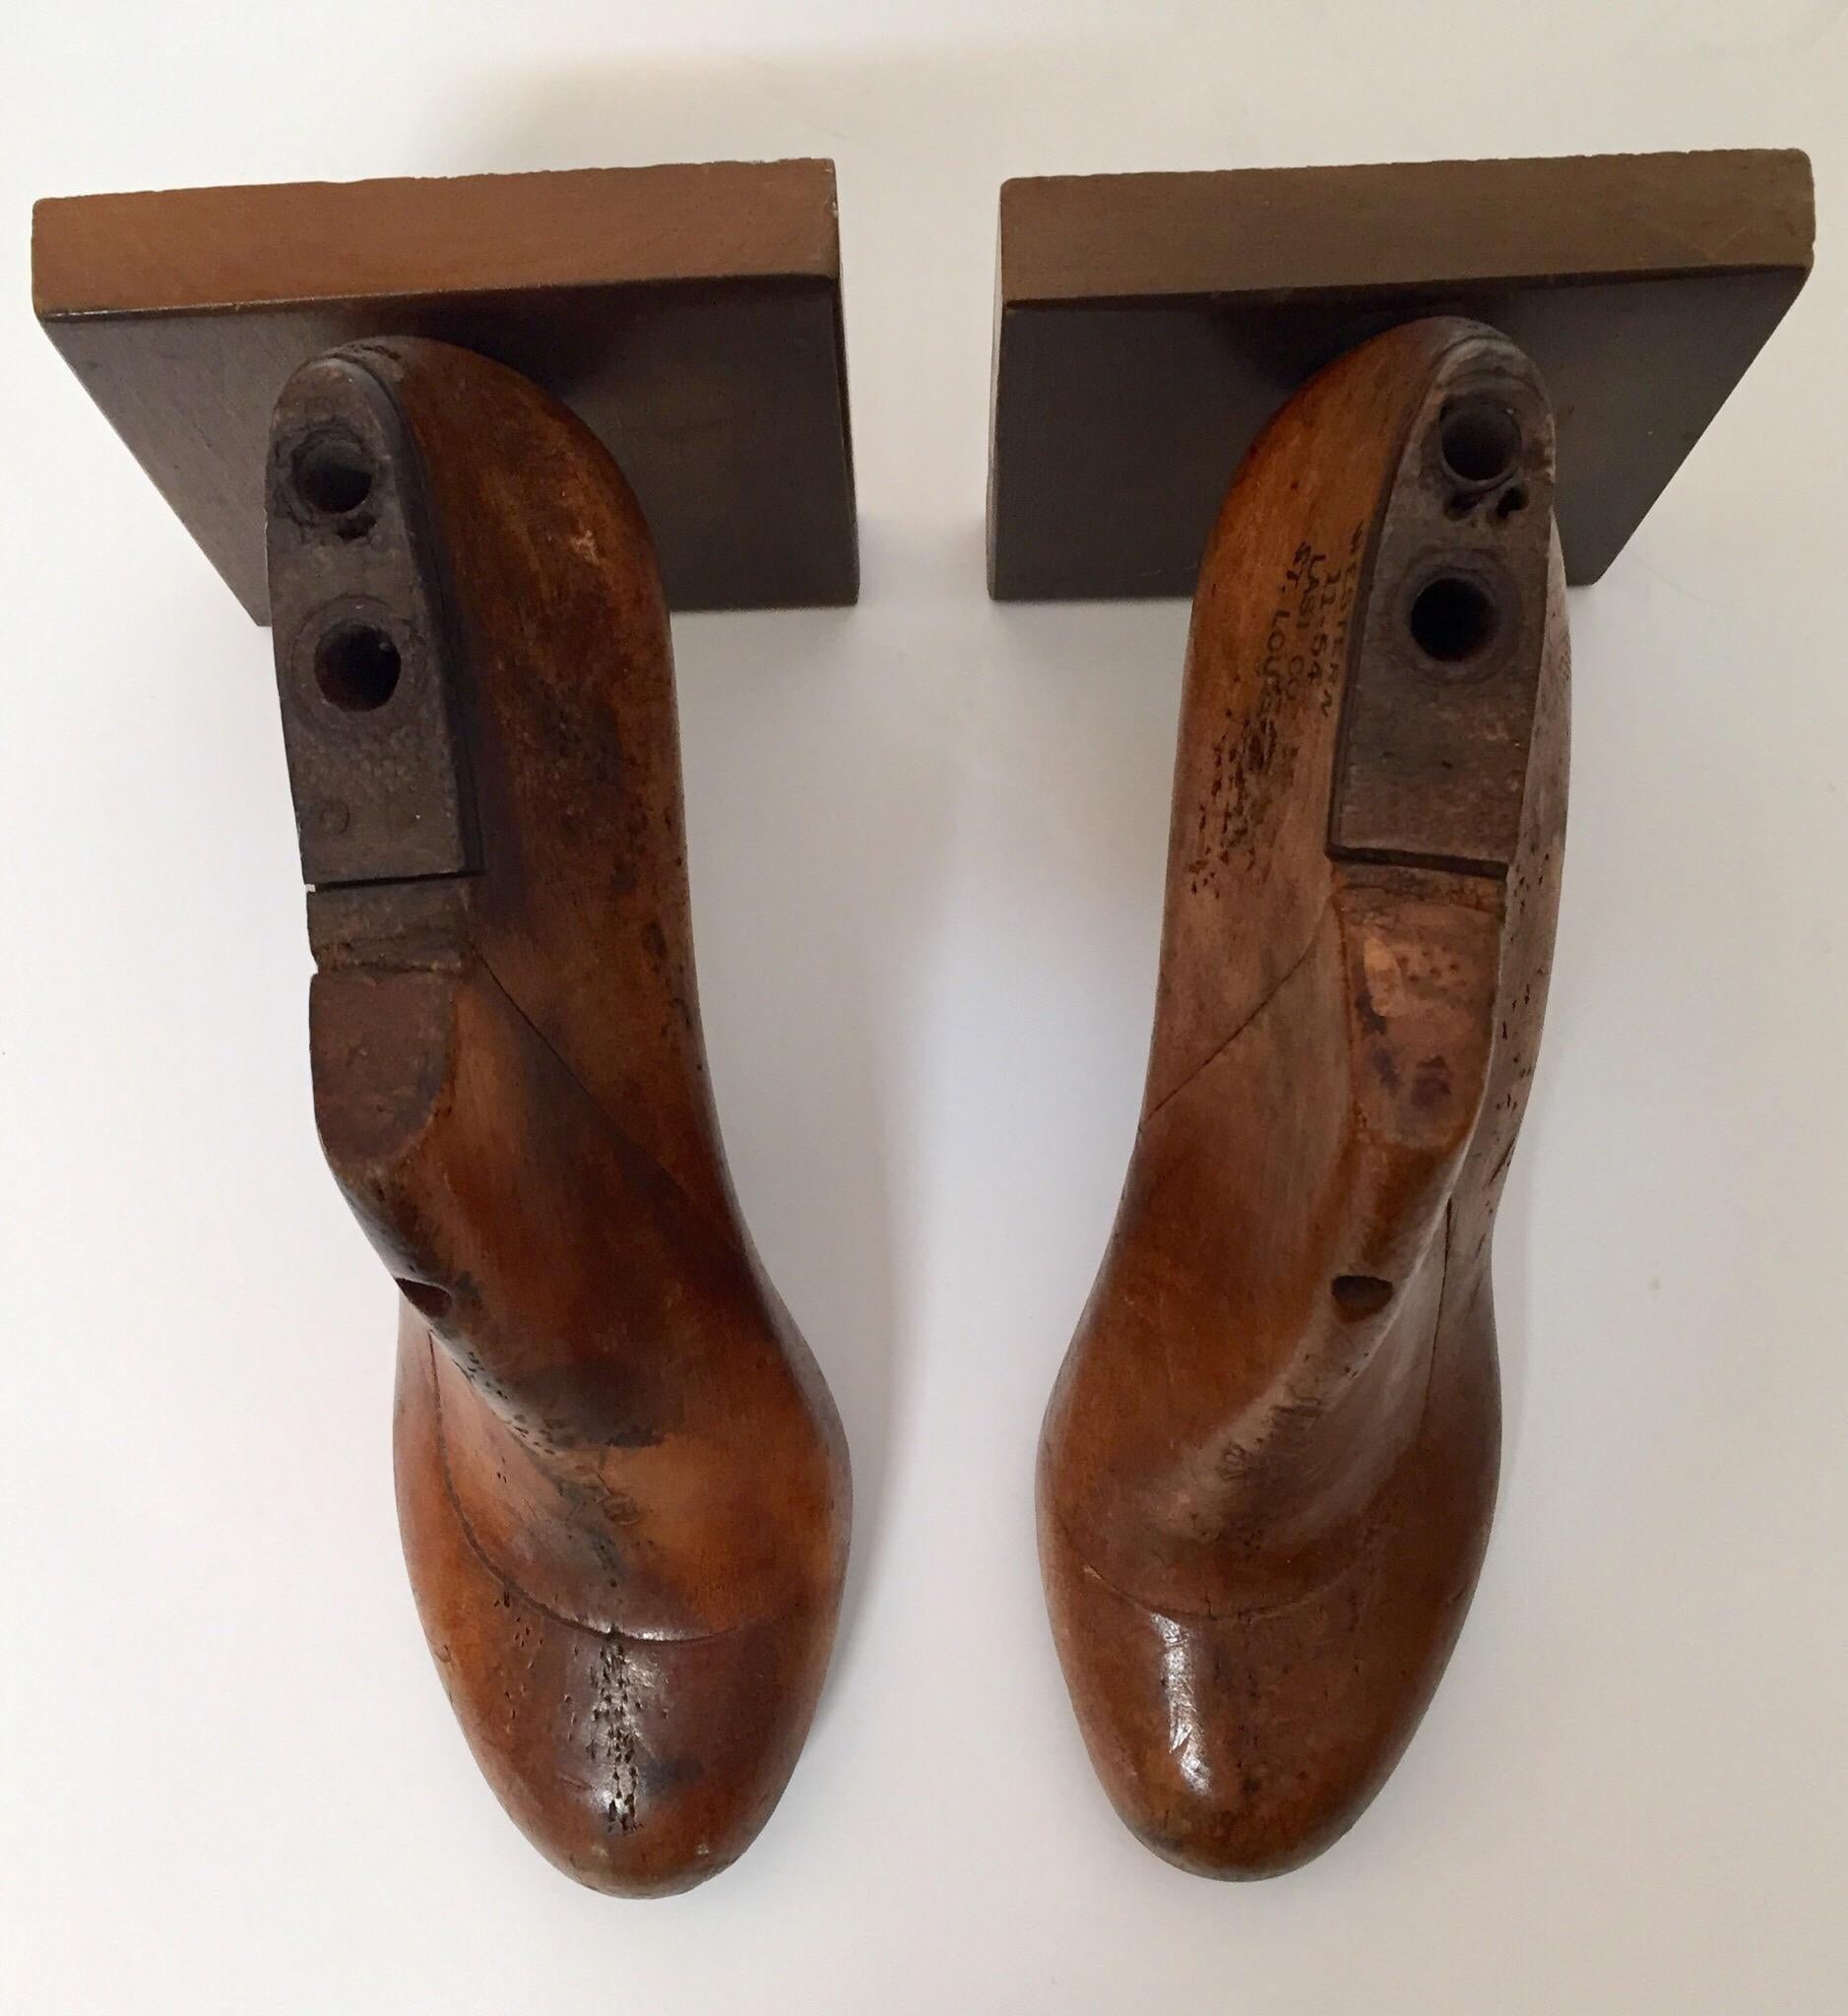 Vintage American Wood Shoe Molds by Western & Co Saint Louis Bookends 10